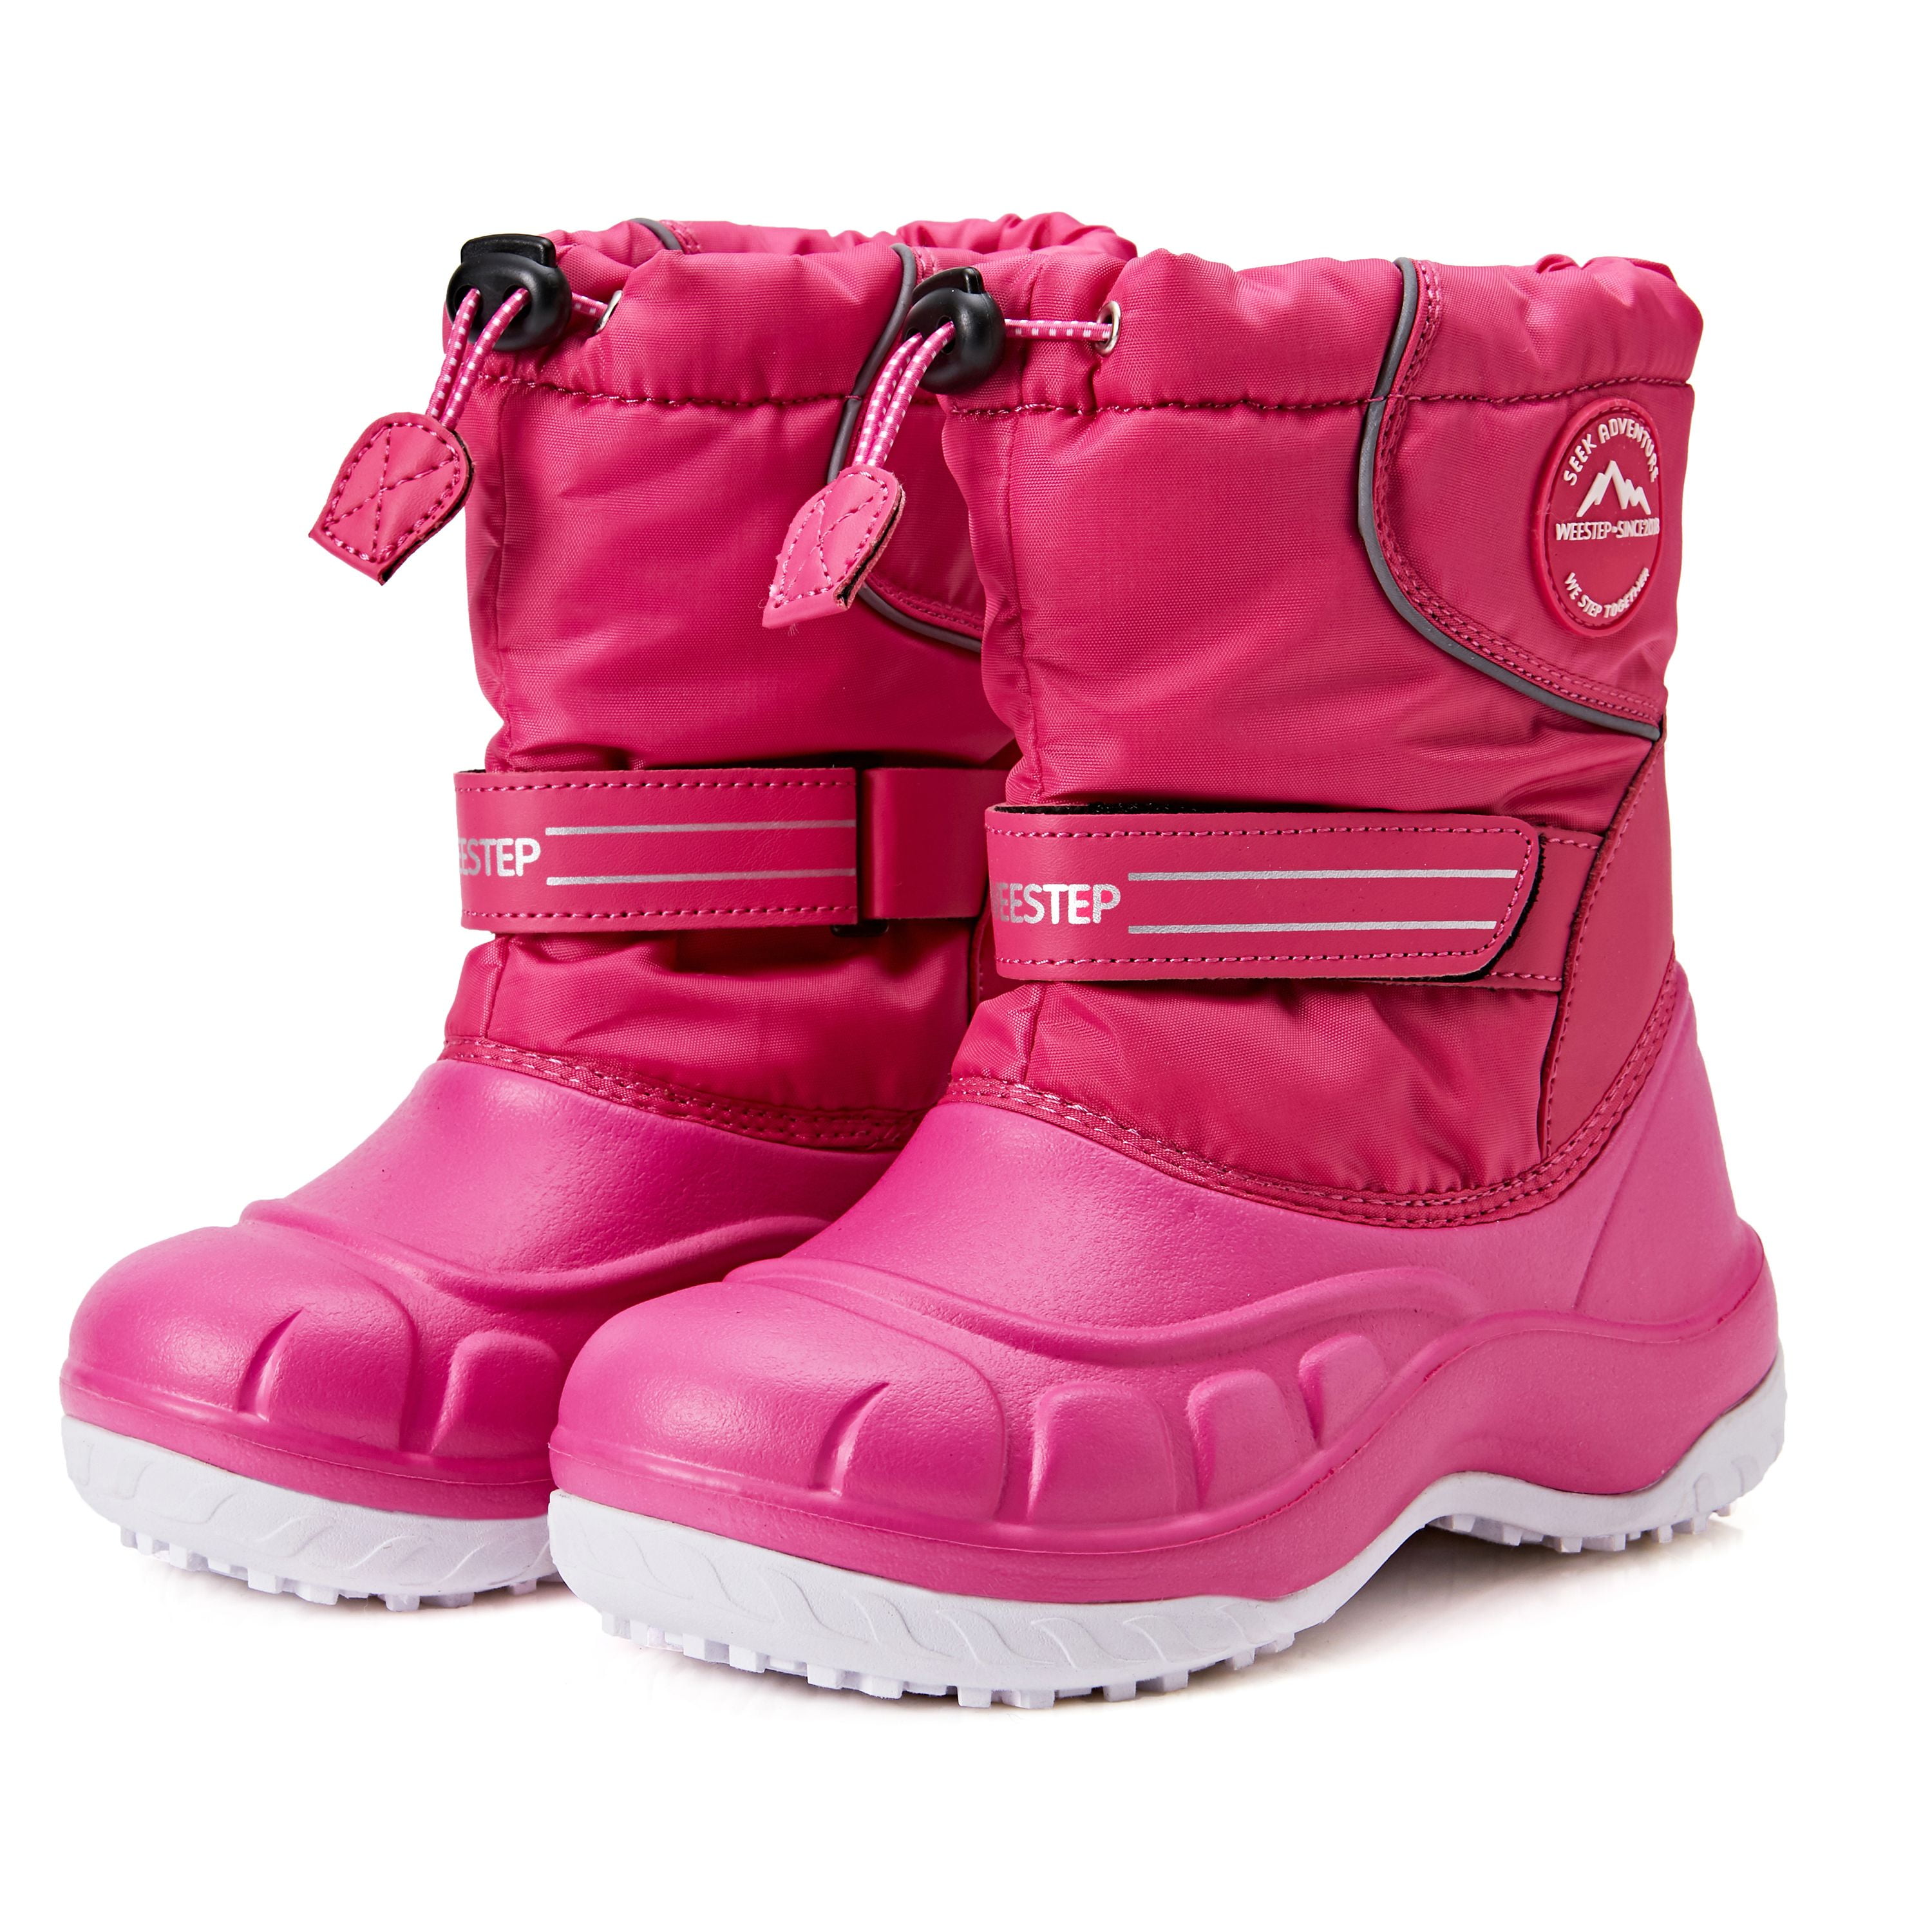 Weestep Toddler Kids Waterproof Snow Winter Boots for Girls and Boys ...